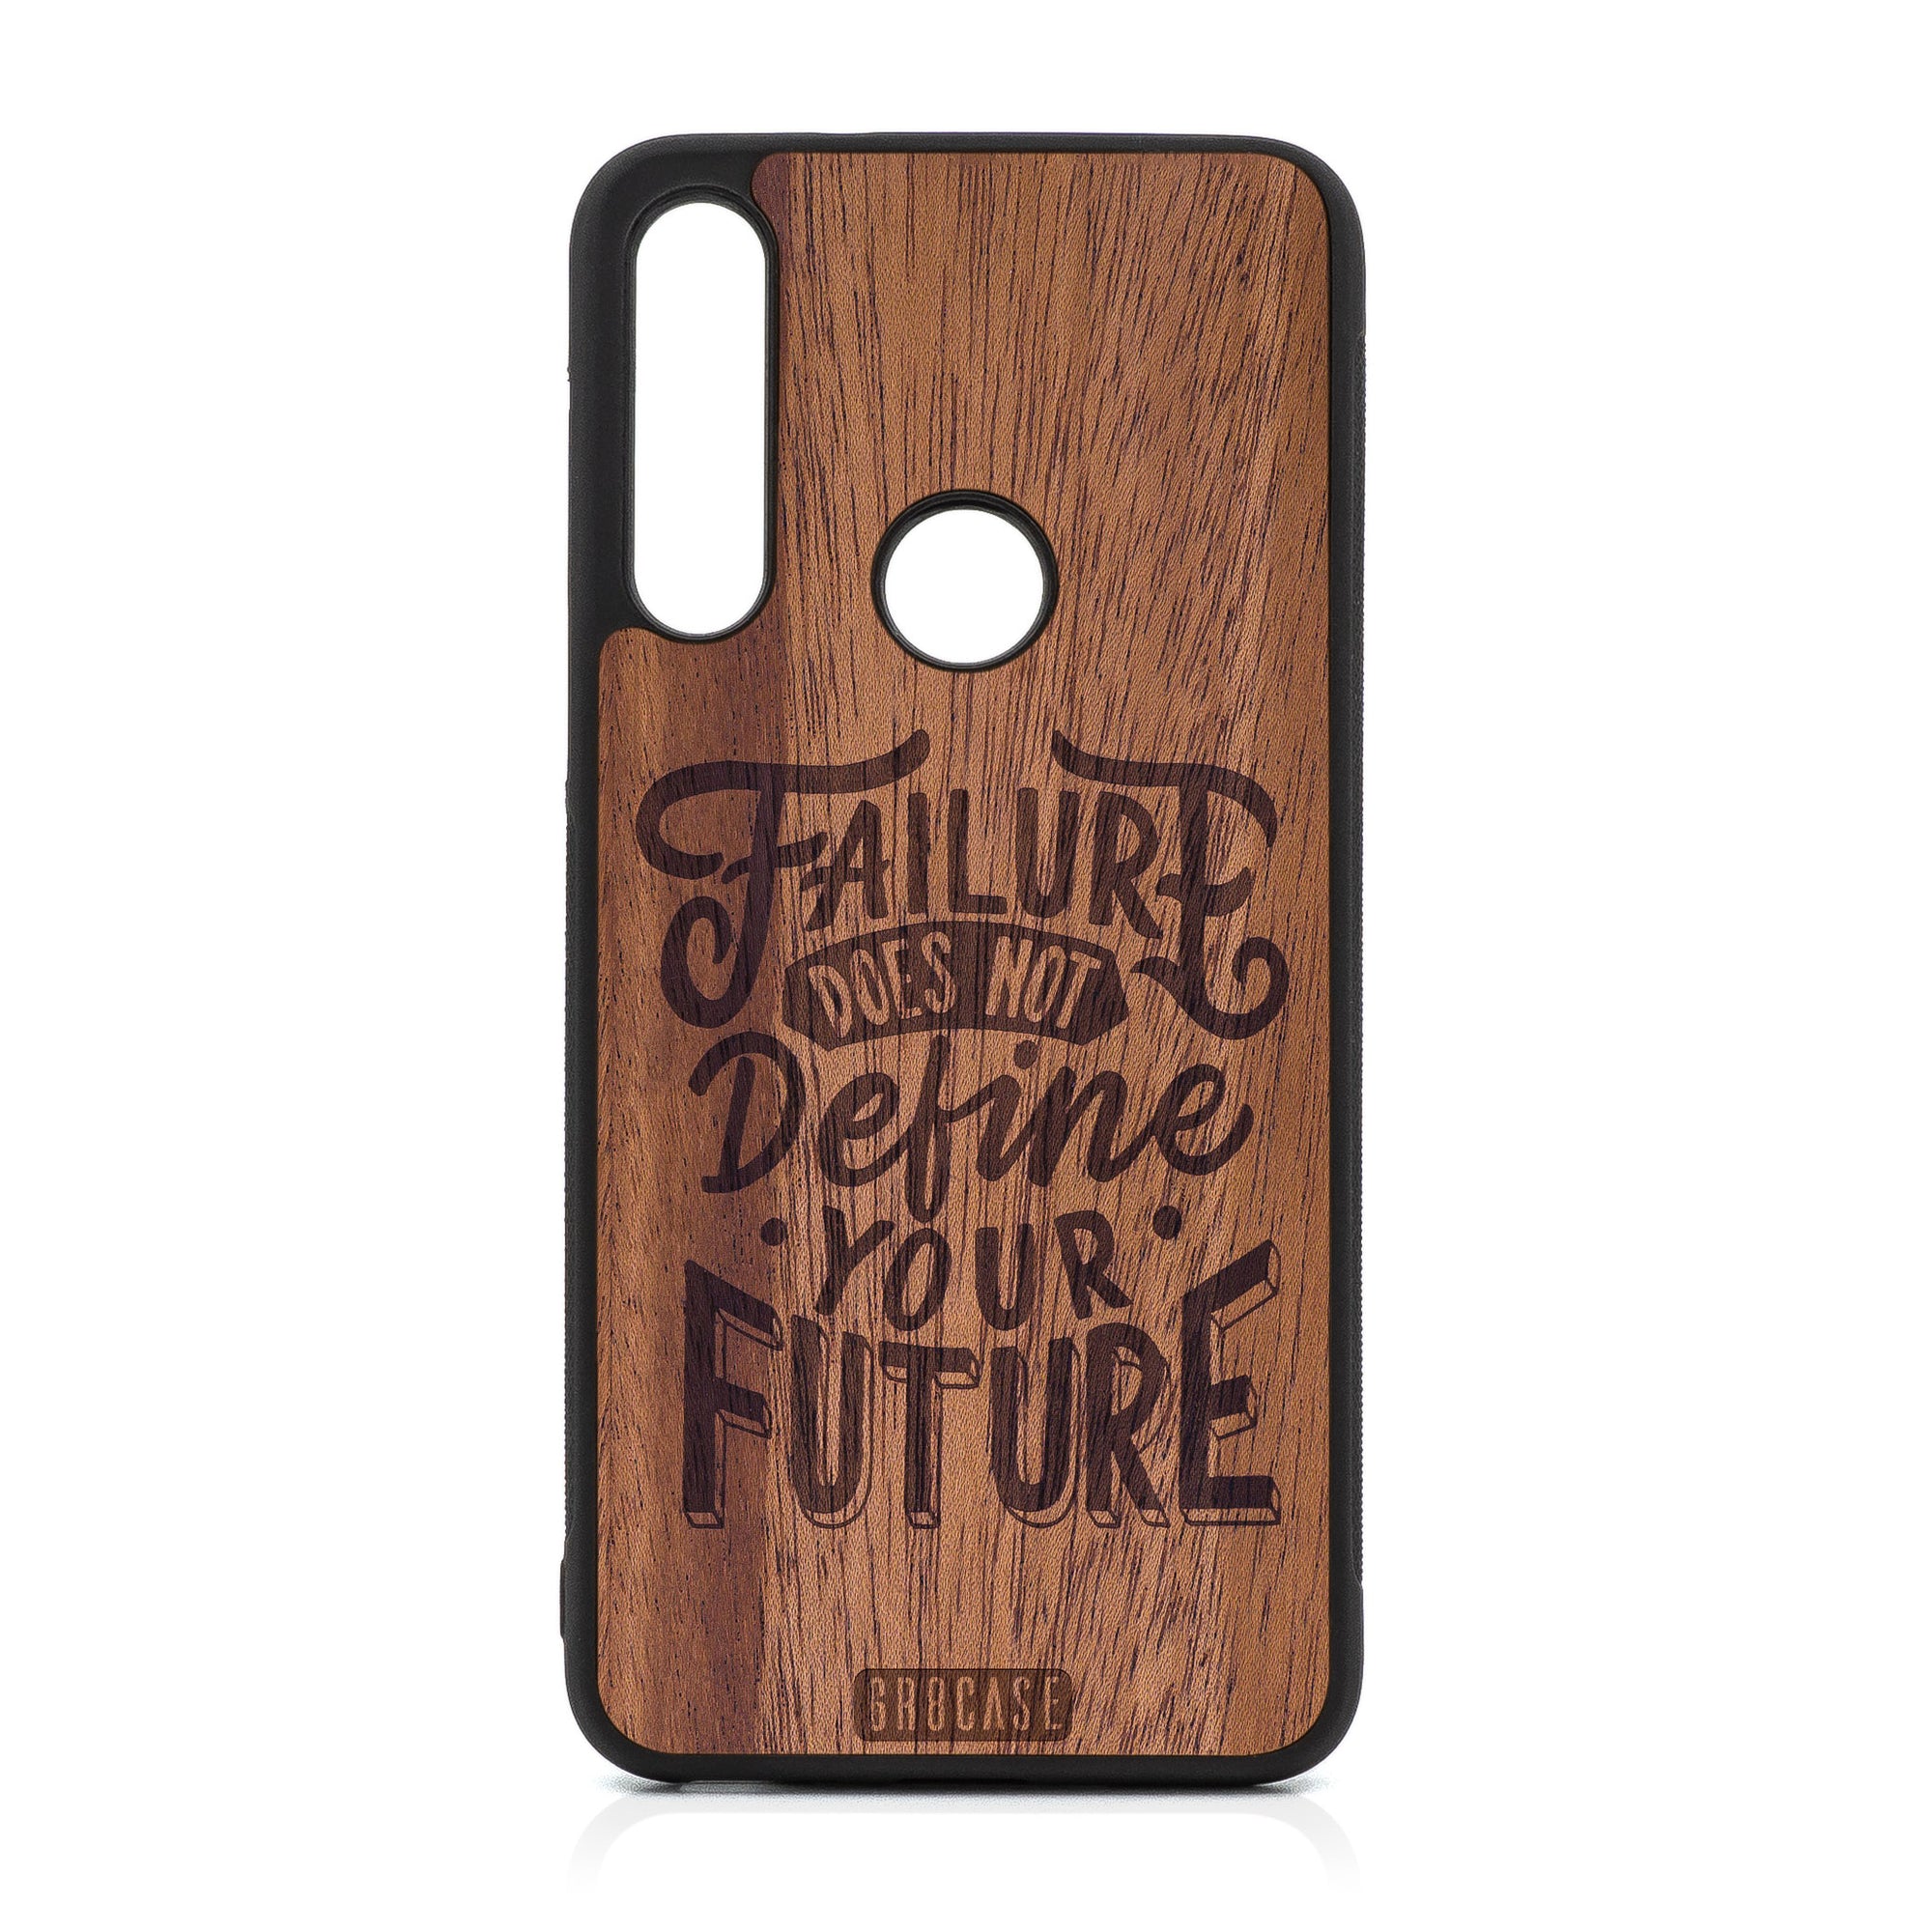 Failure Does Not Define You Future Design Wood Case For Moto G Fast